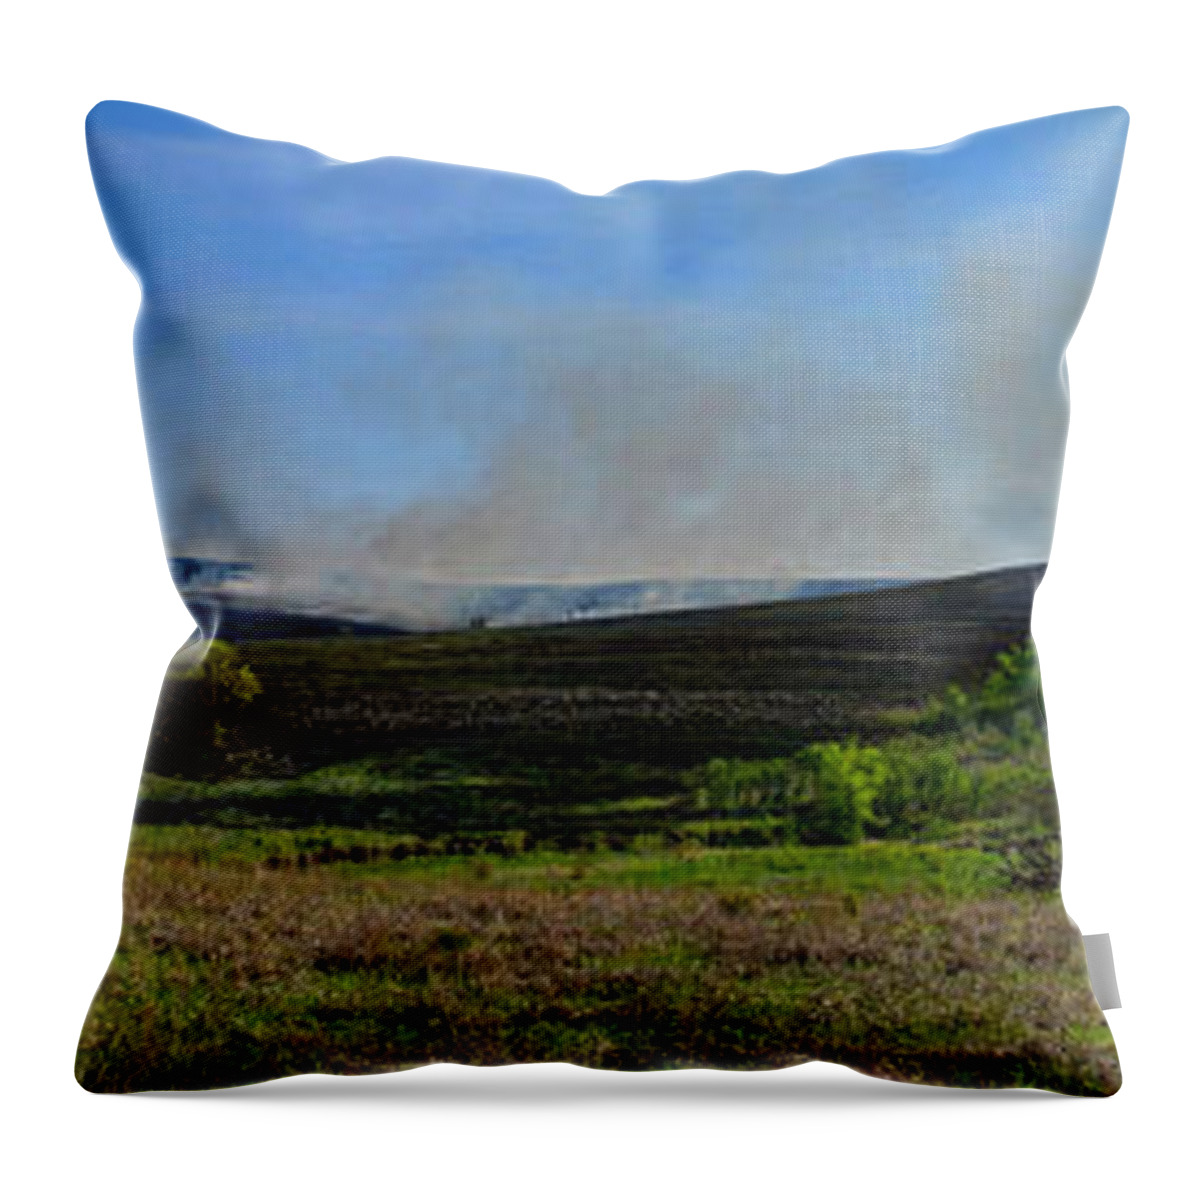 Burn Throw Pillow featuring the photograph Flint Hills Controlled Burn by Alan Hutchins